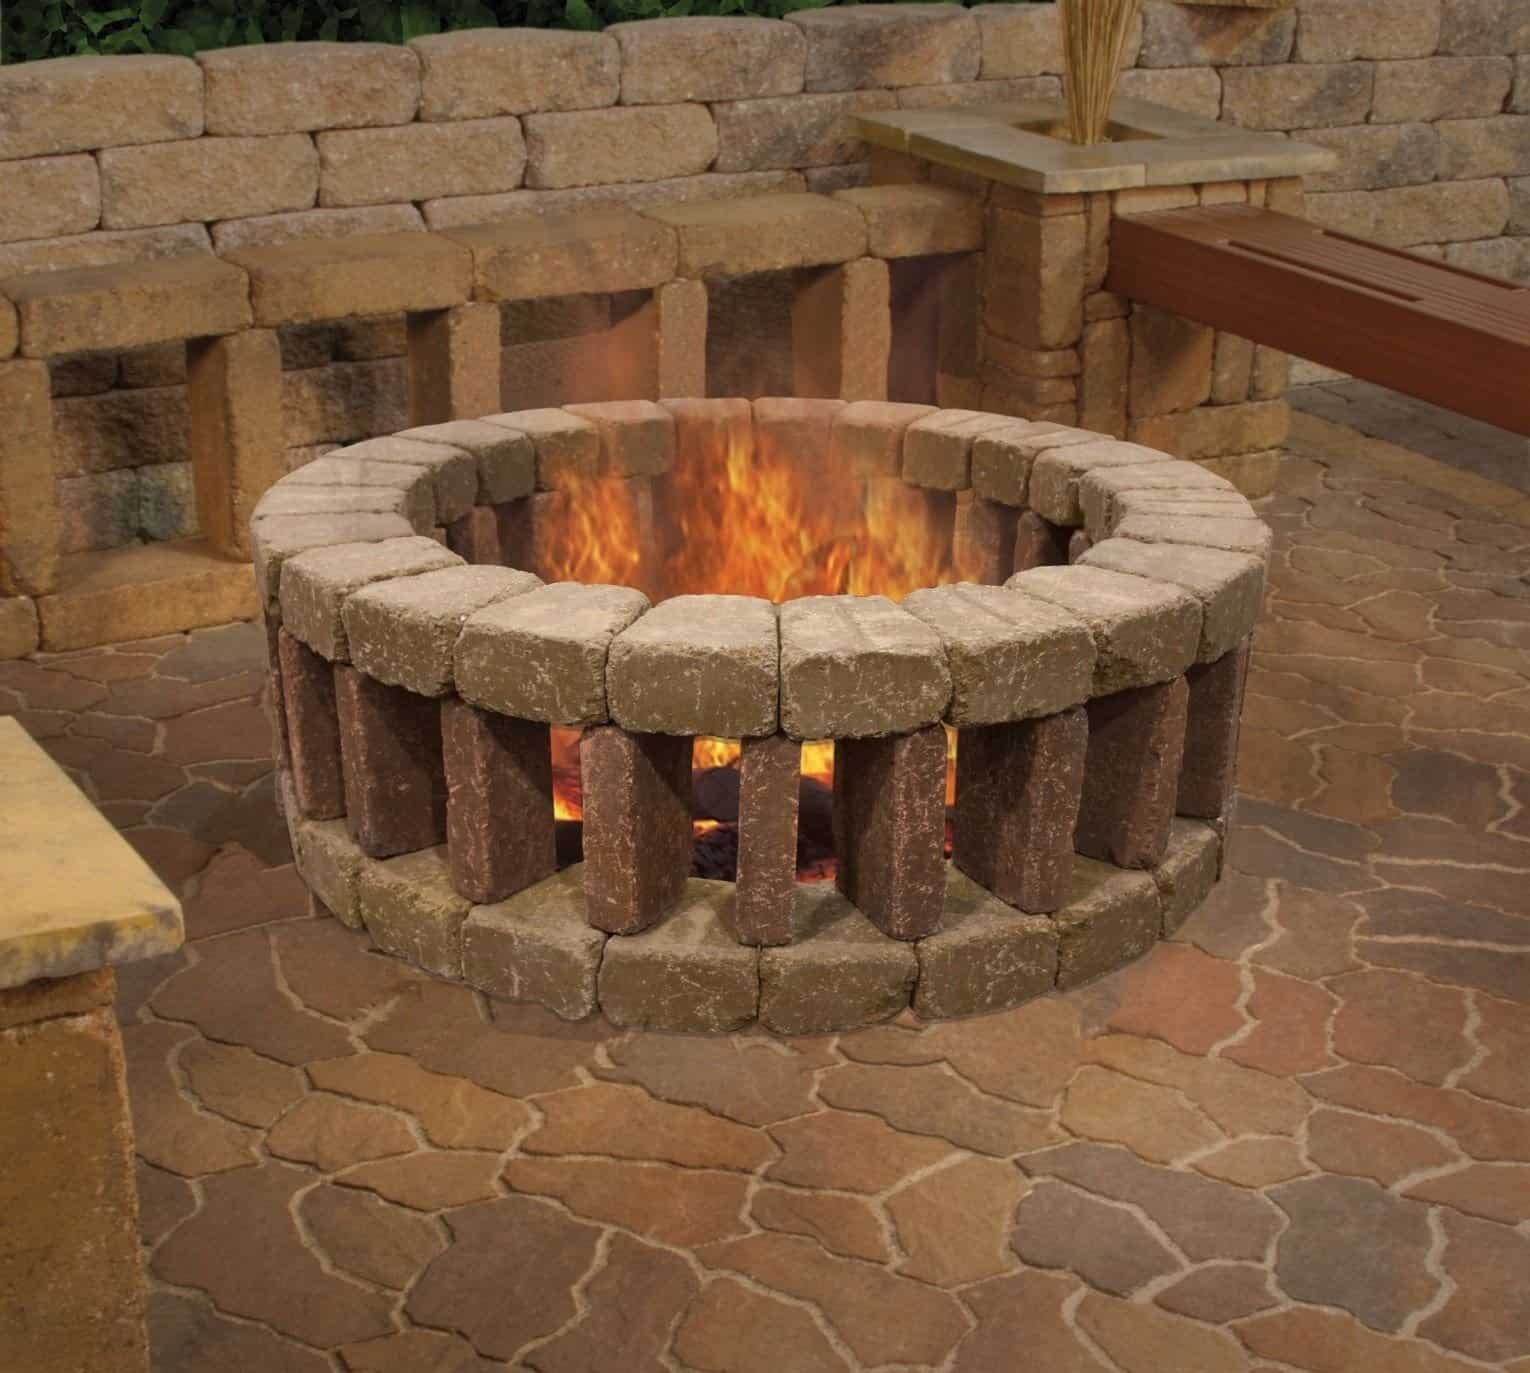 10 Spectacular Do It Yourself Fire Pit Ideas 2020